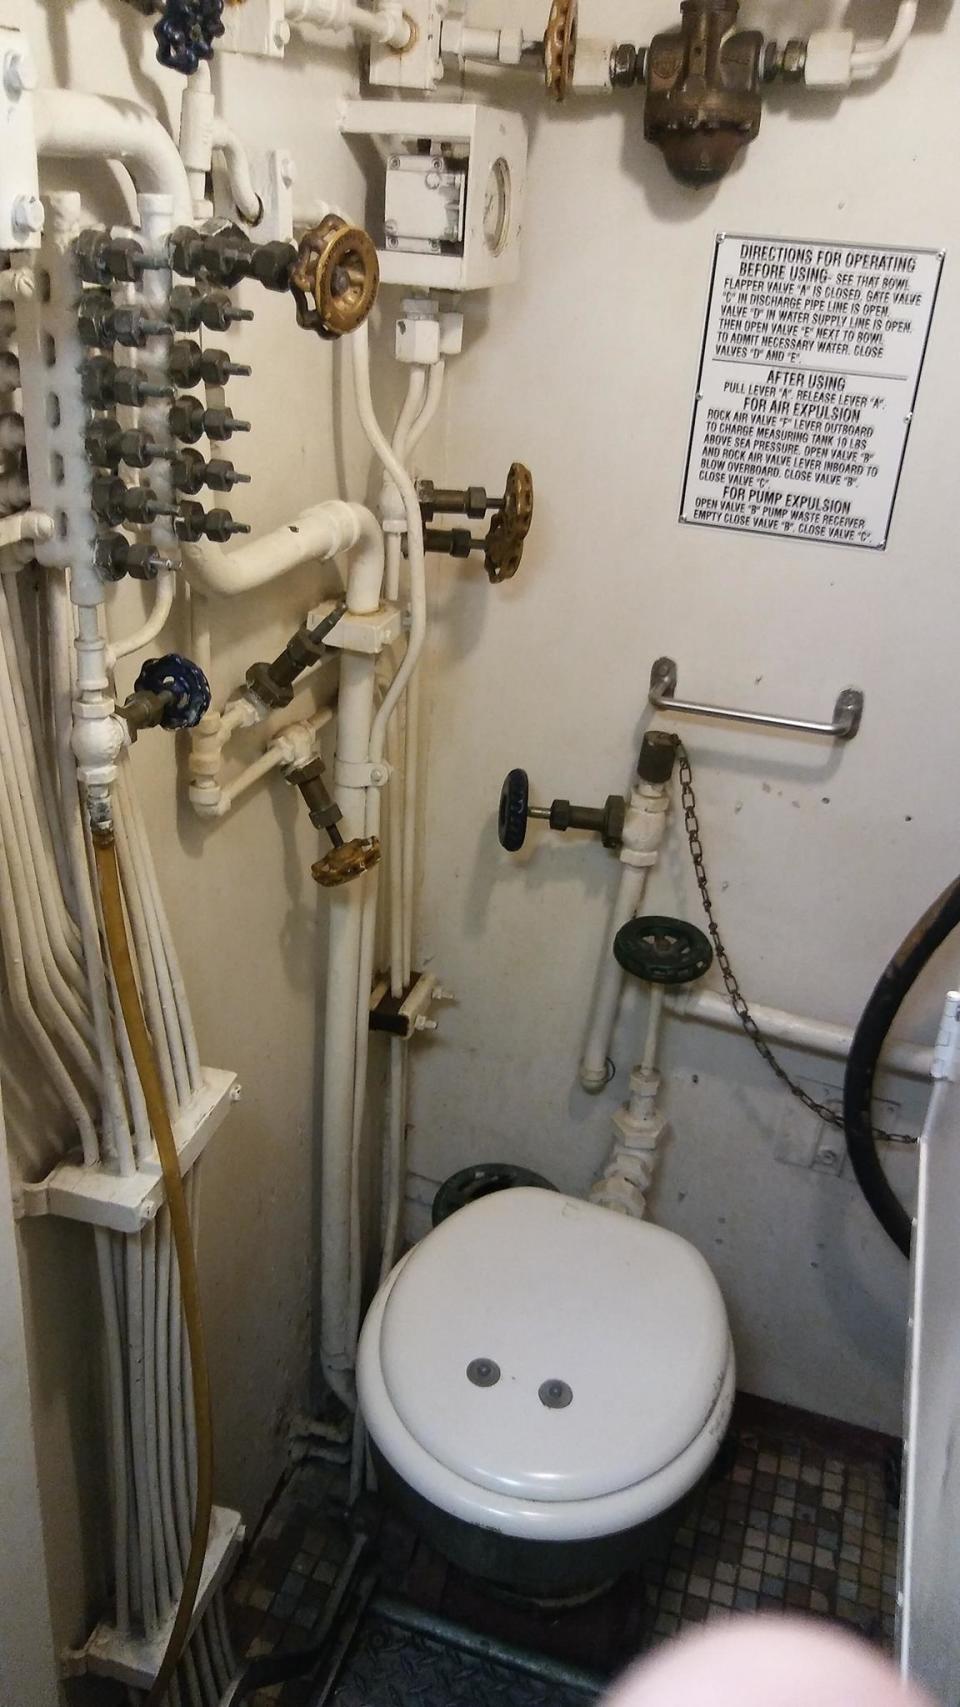 A toilet bowl surrounded by pipes and chains and cords and valves and knobs, with a sign with lots of text labeled, "Directions for operating: before and after using"